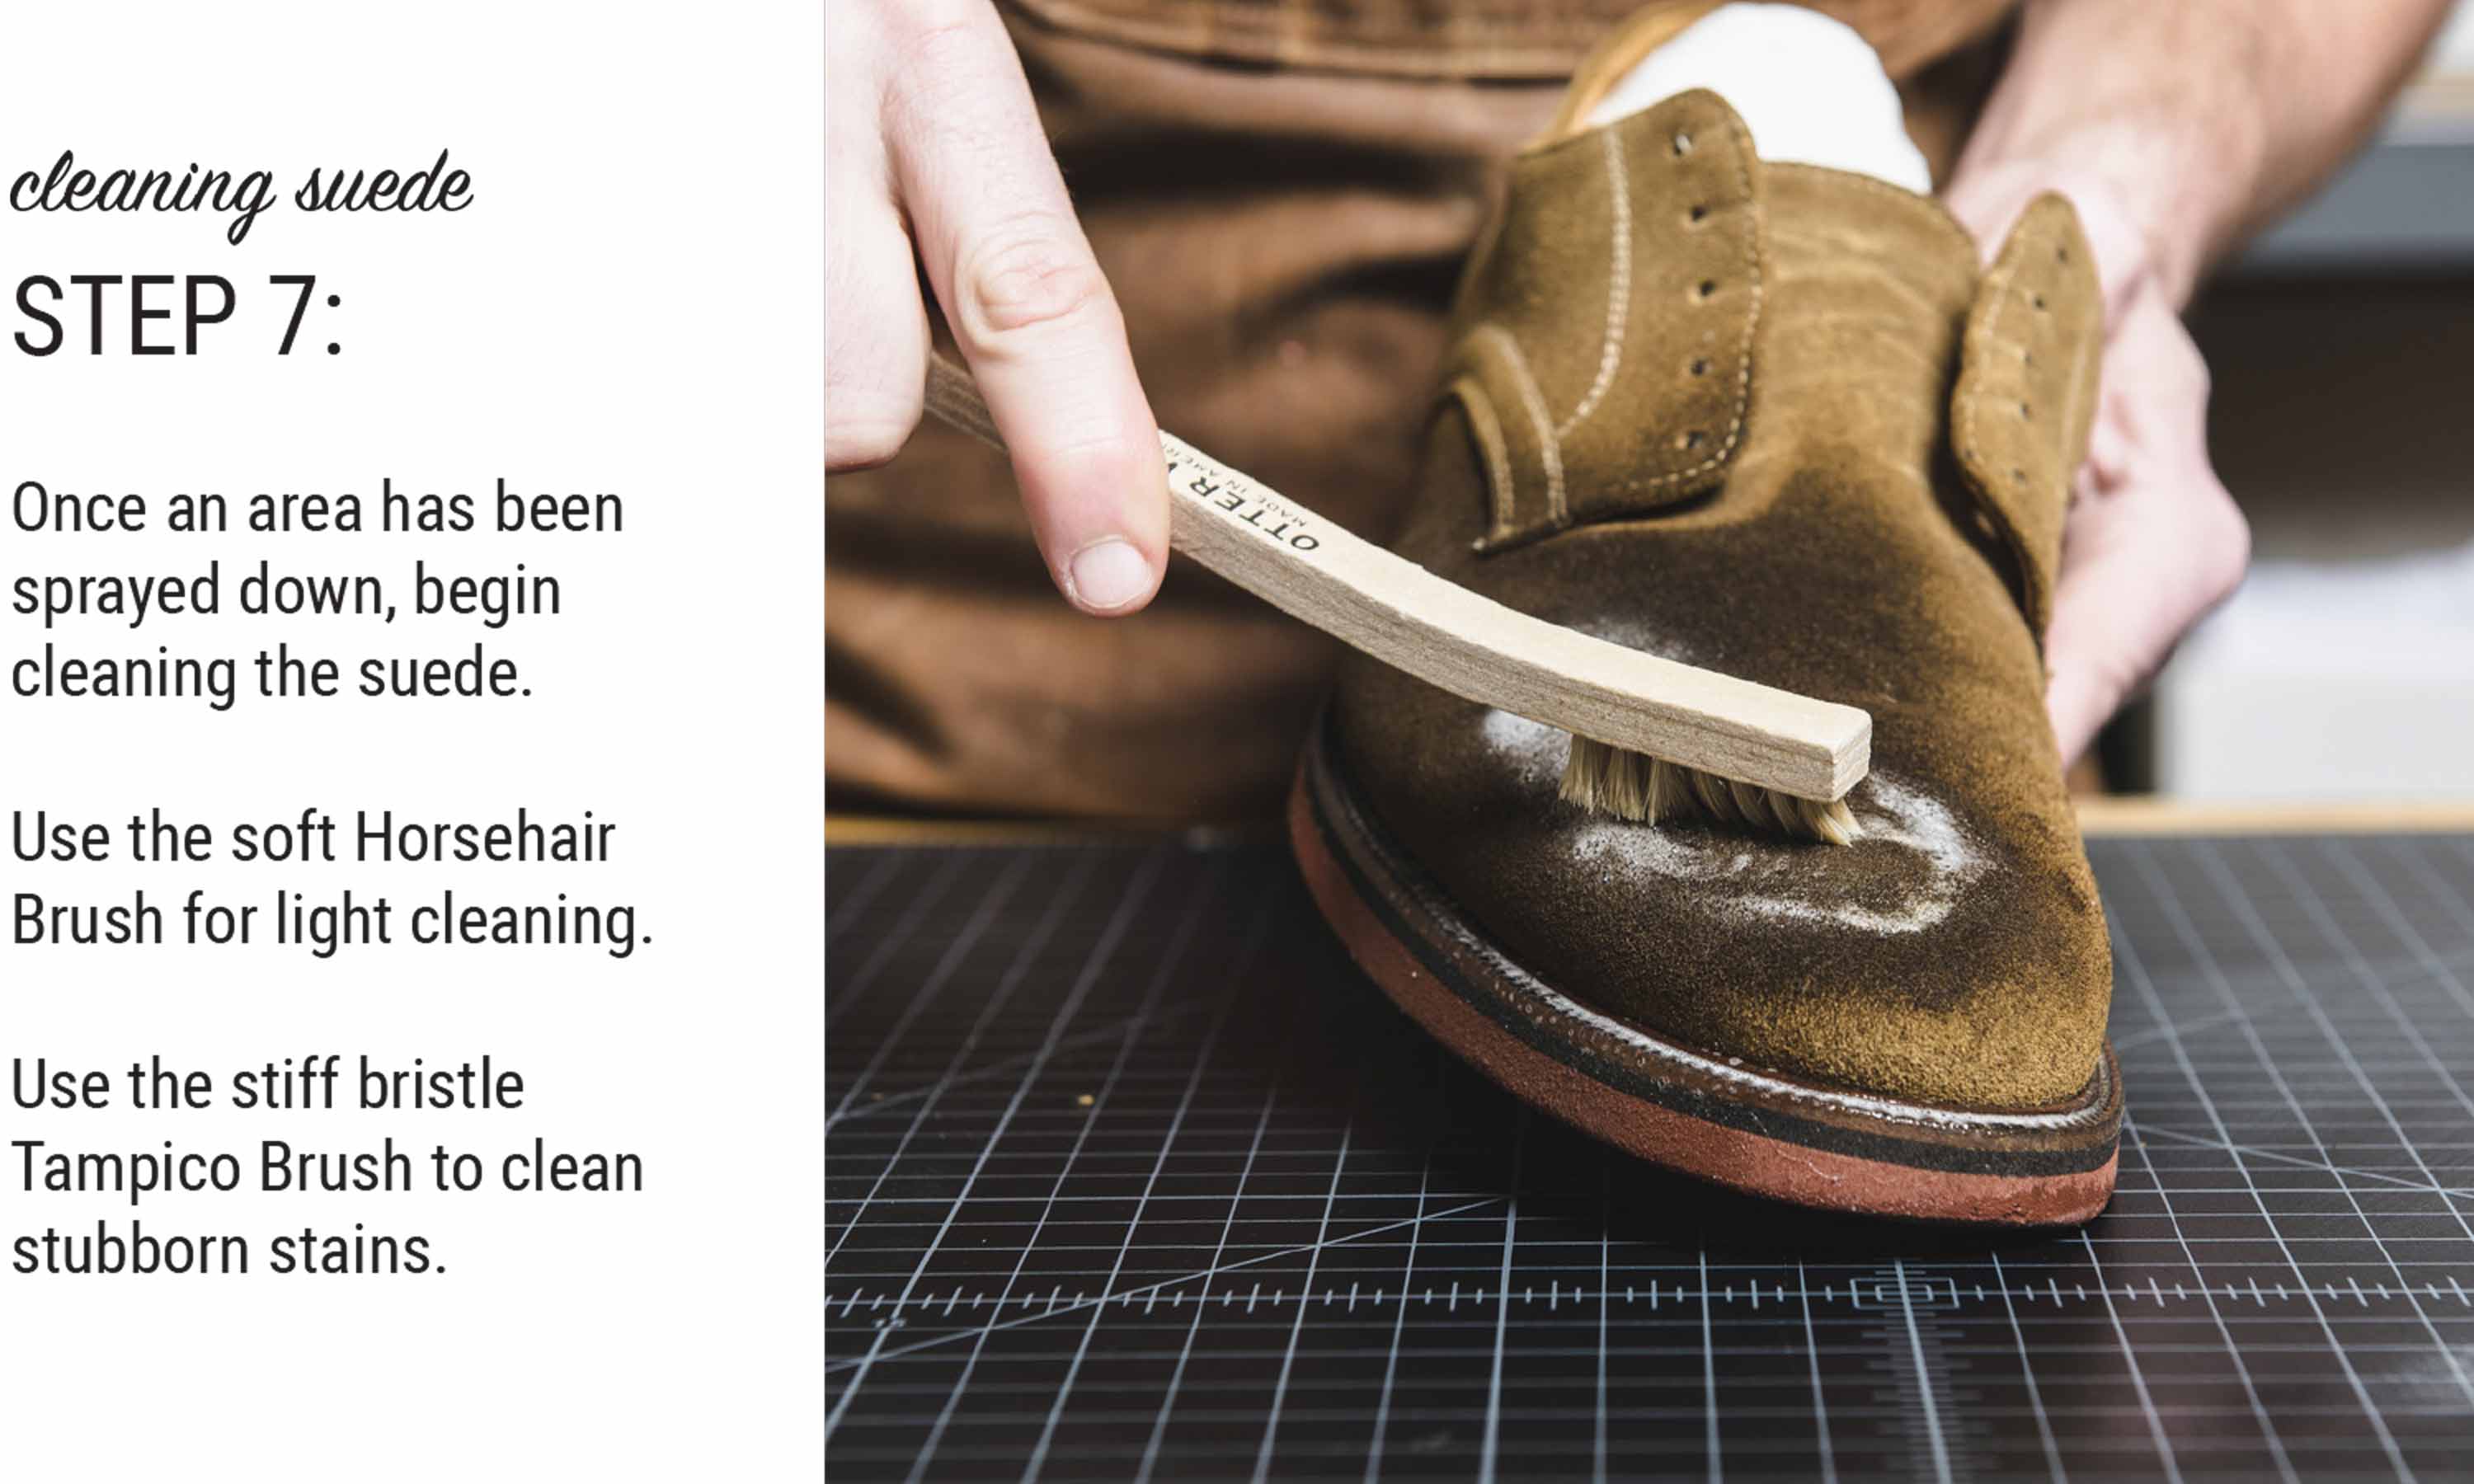 How To Clean Suede Shoes The Right Way The Trend Spotter | vlr.eng.br